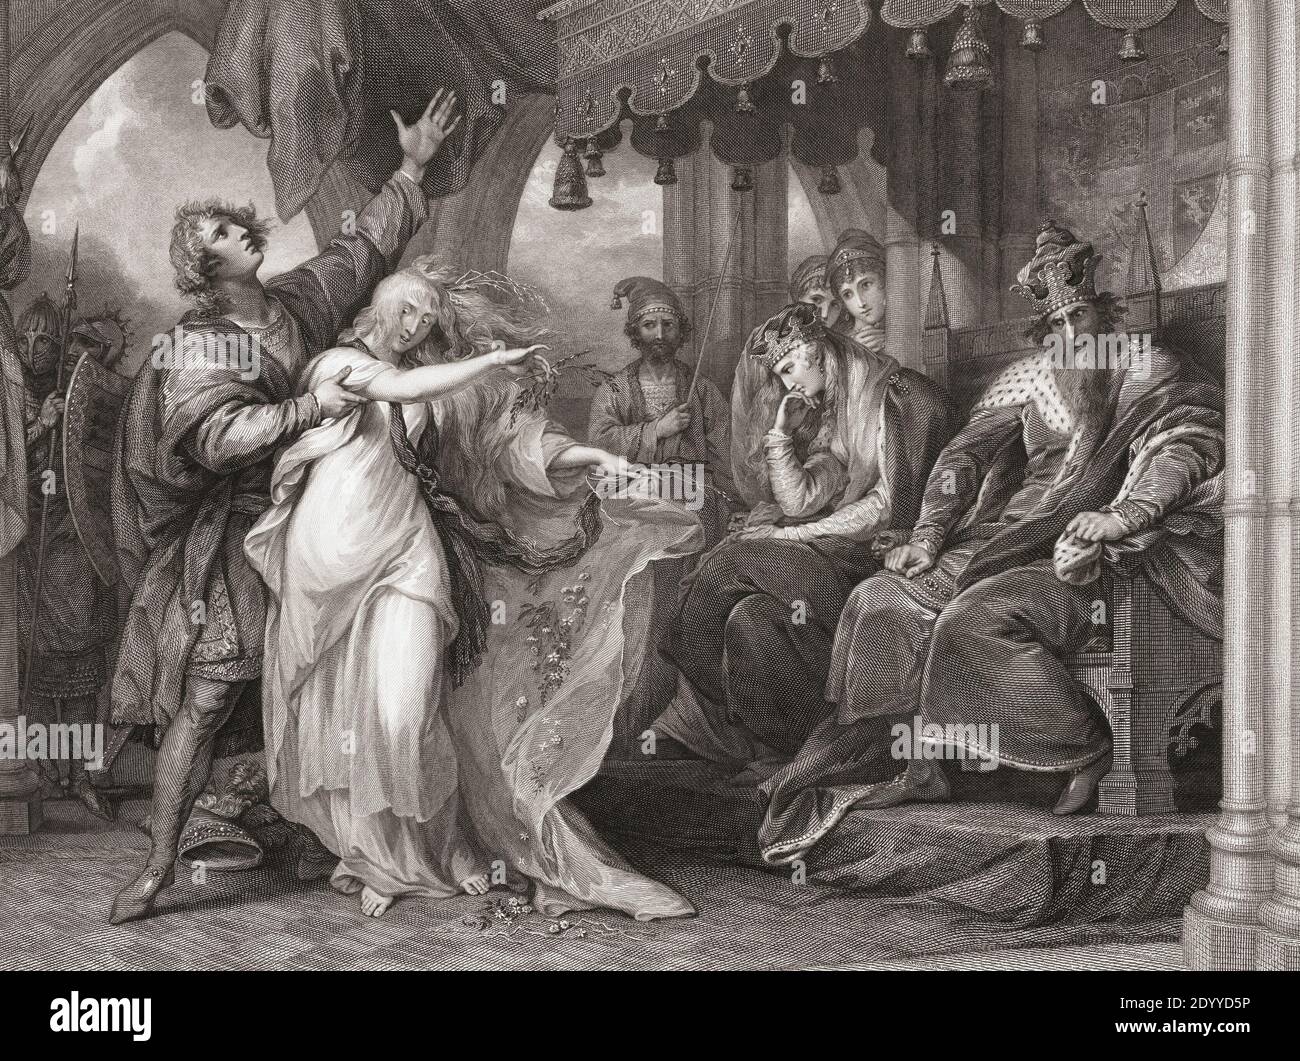 Illustration for William Shakespeare’s play Hamlet, Act IV, Scene V.   From an 18th century engraving by Francis Legat after a work by Benjamin West. Stock Photo